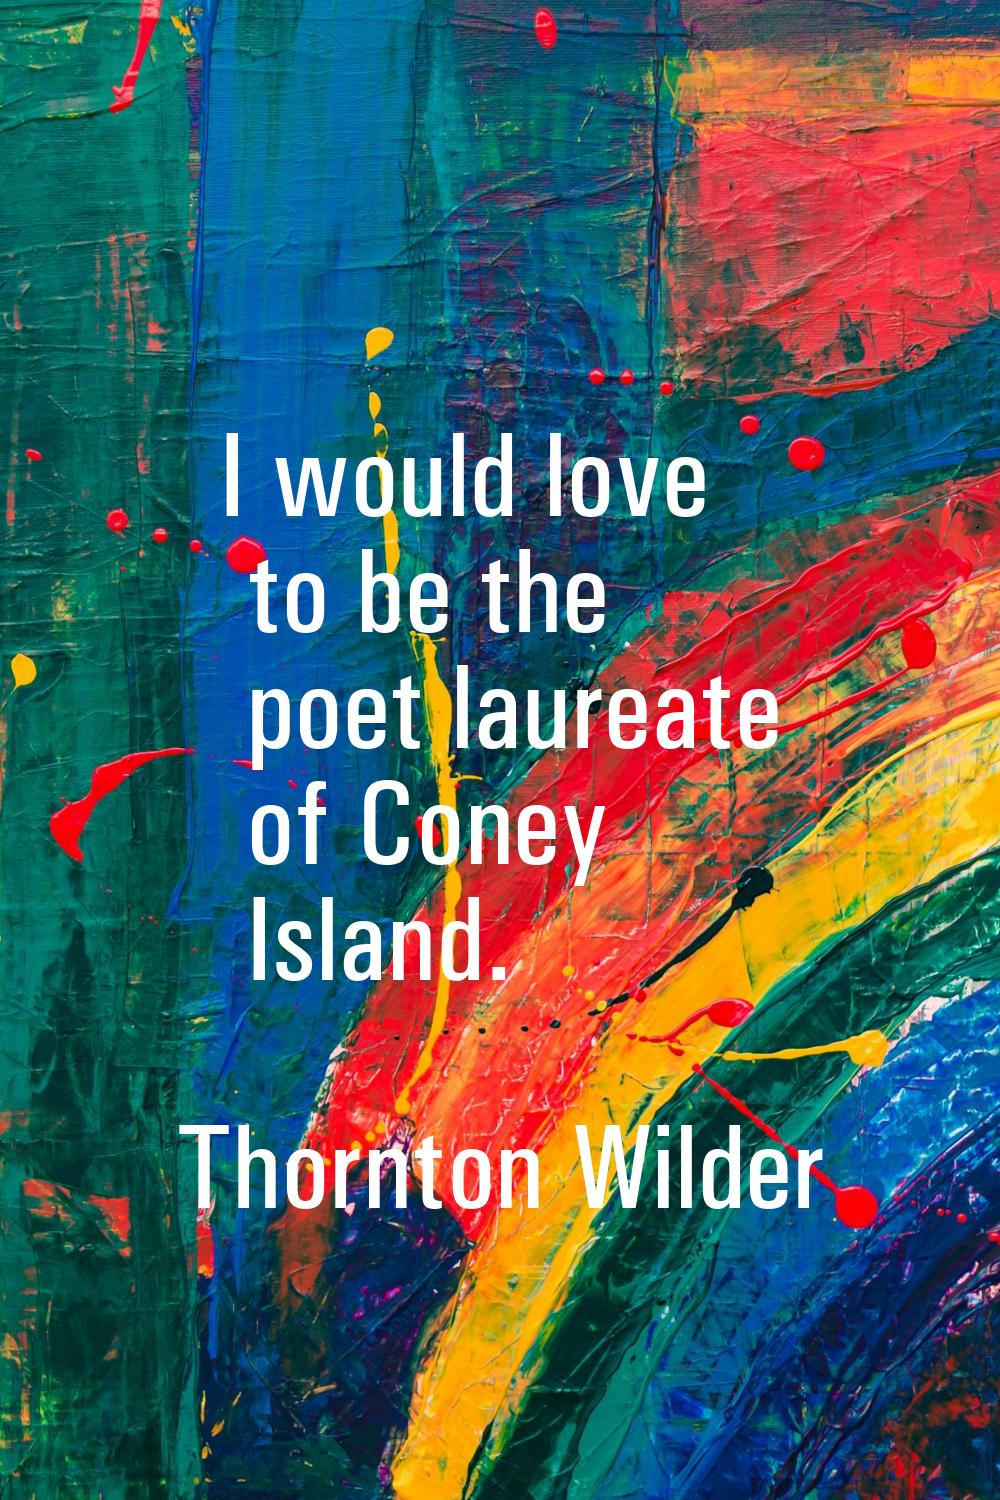 I would love to be the poet laureate of Coney Island.